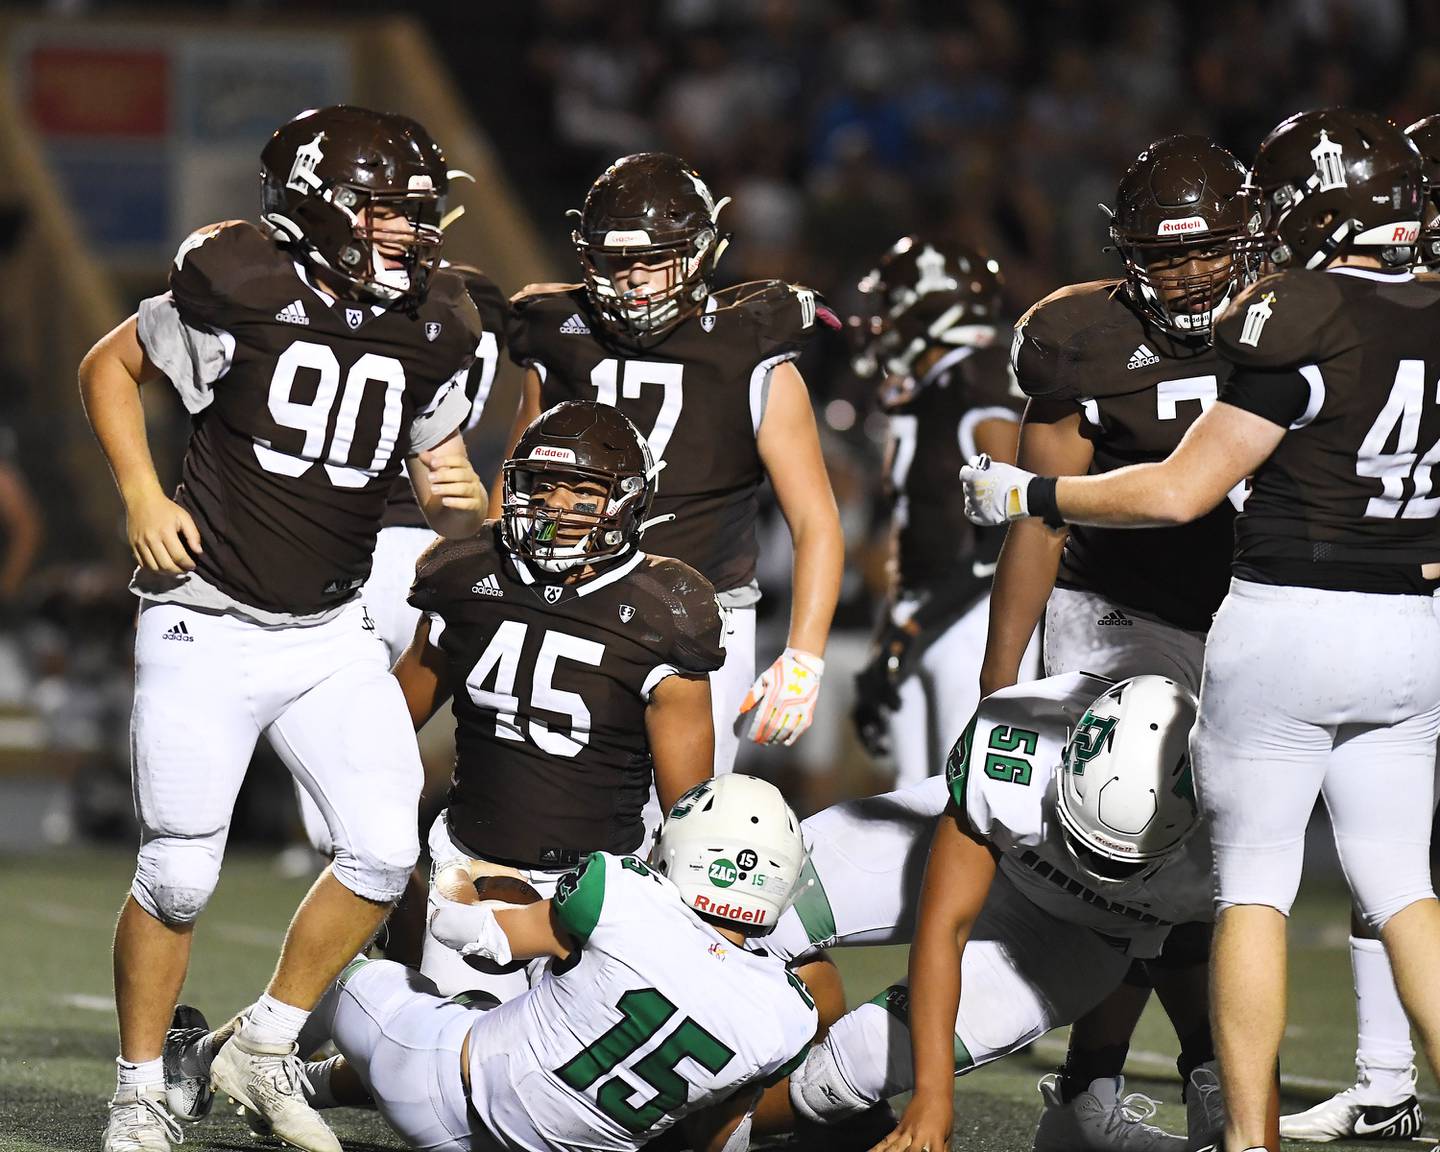 Joliet Catholic's defensive gang tackle Providence Catholic's Ethan Litynski on Friday, Sep.  17, 2021, at Joilet Memorial Stadium in Joilet, IL.